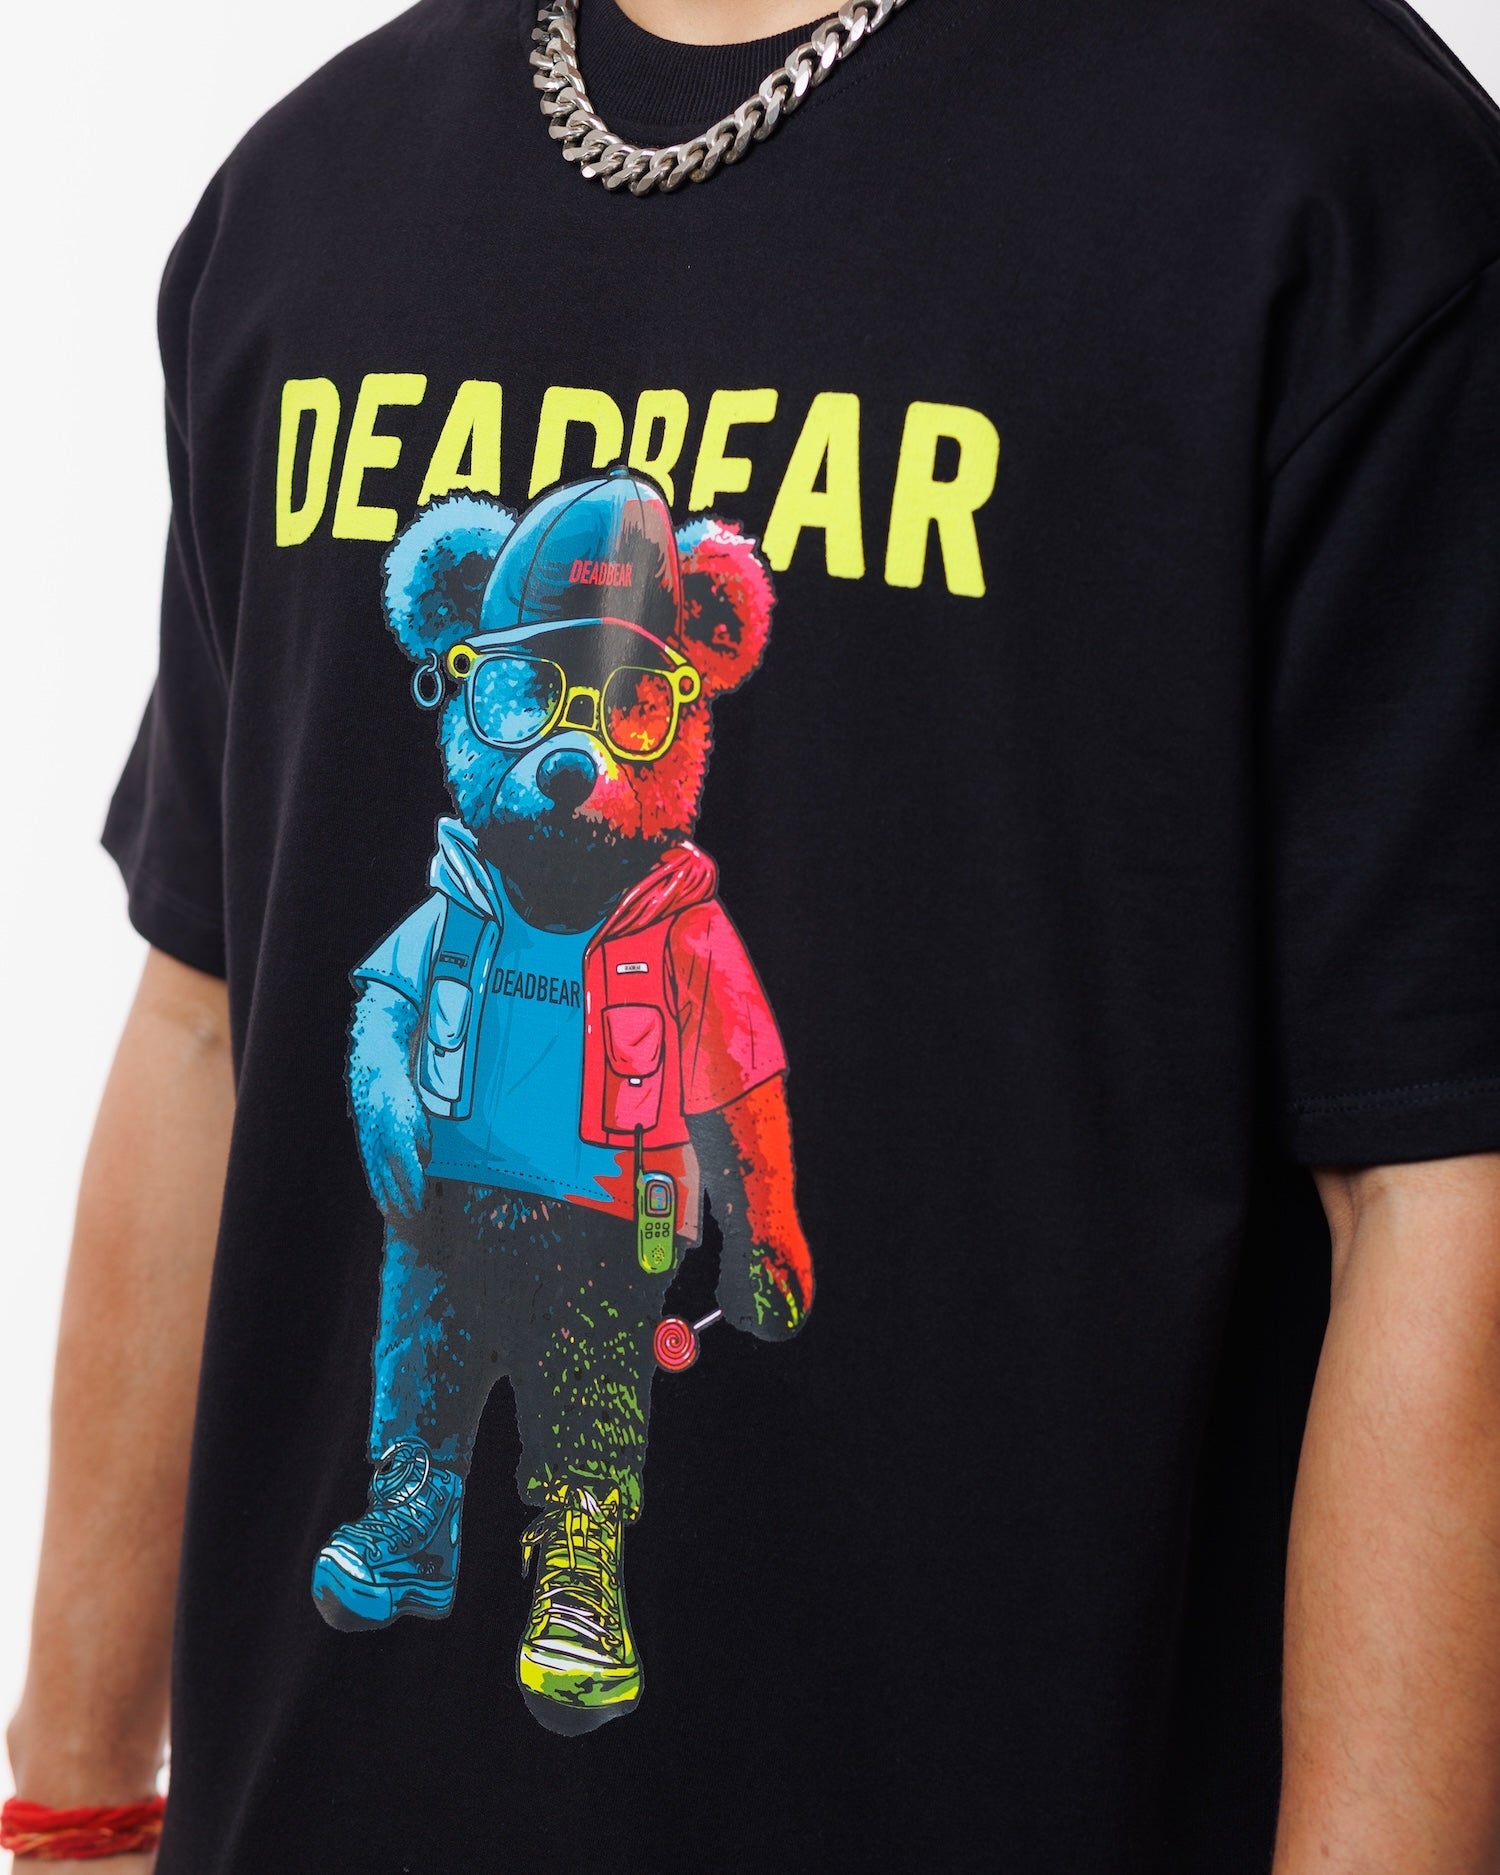 The Ted-Tee Black